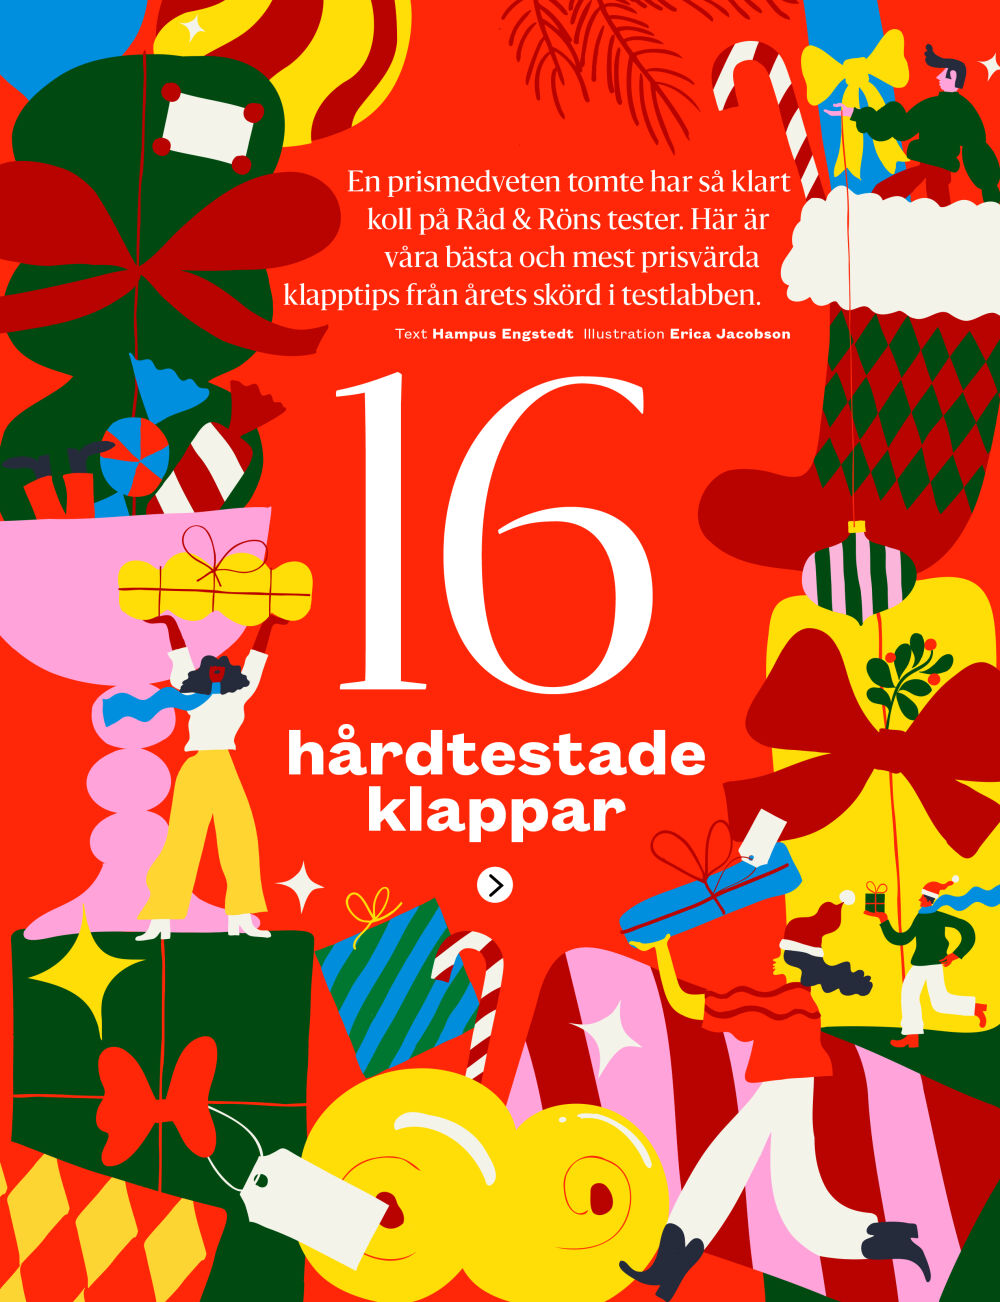 Graphic and colorful Christmas illustration for RÅD&RÖN ny Erica Jacobson